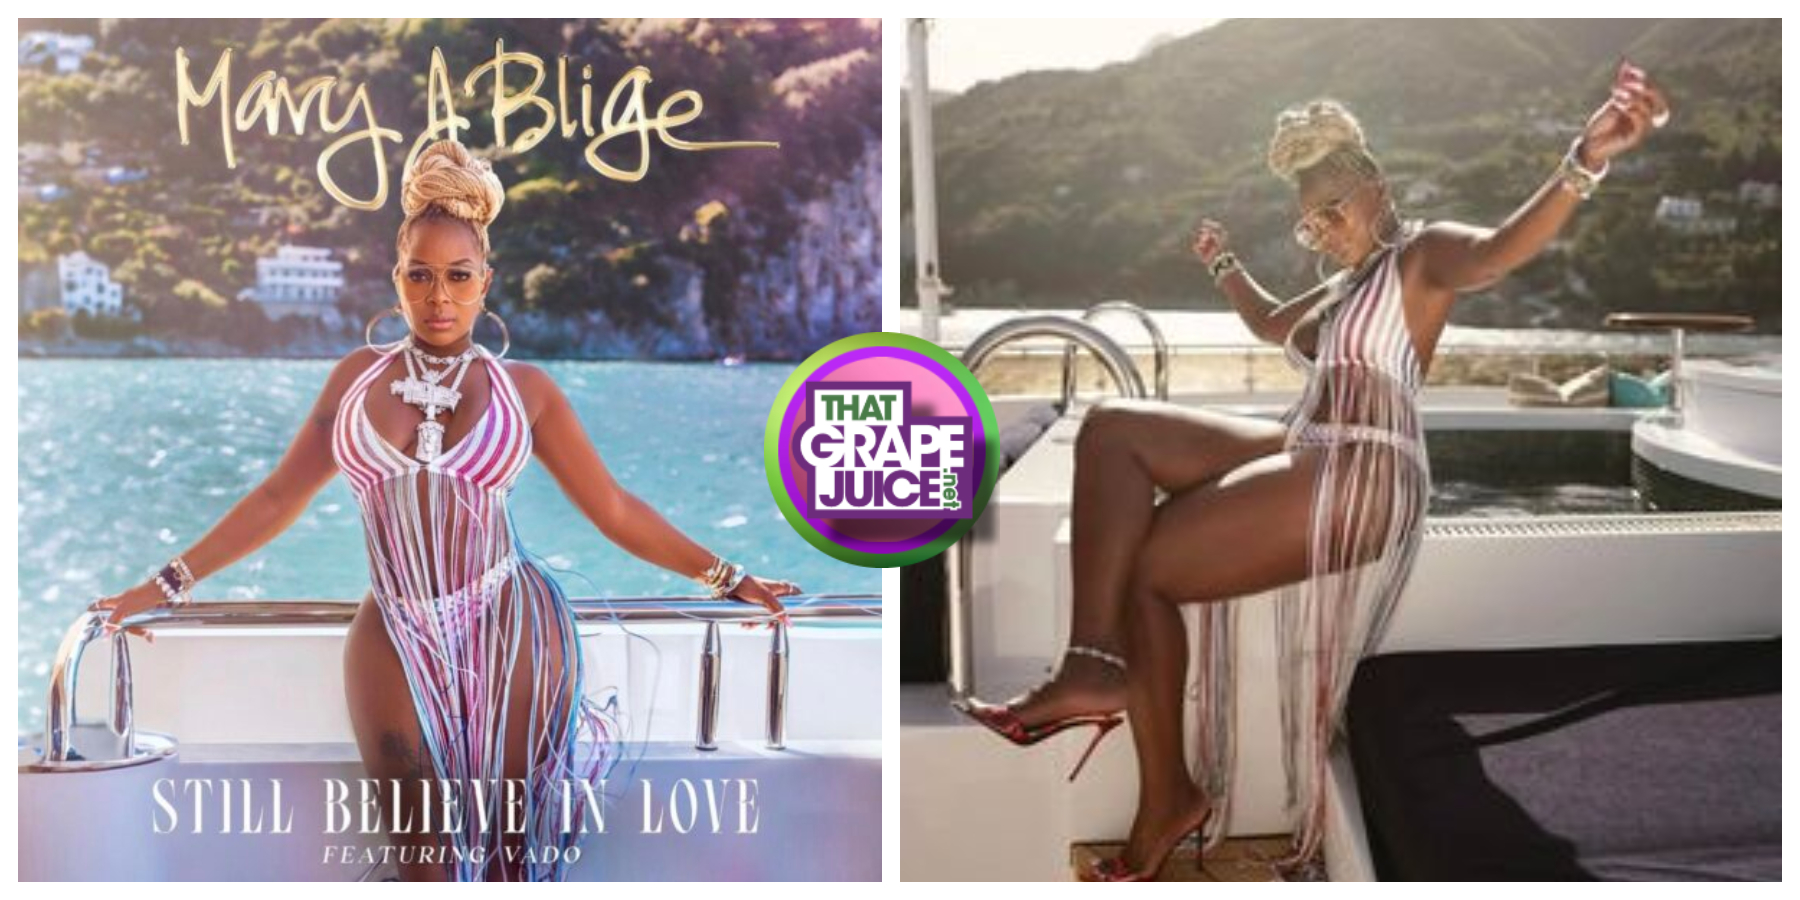 New Song: Mary J. Blige -‘Still Believe in Love’ (featuring Vado)